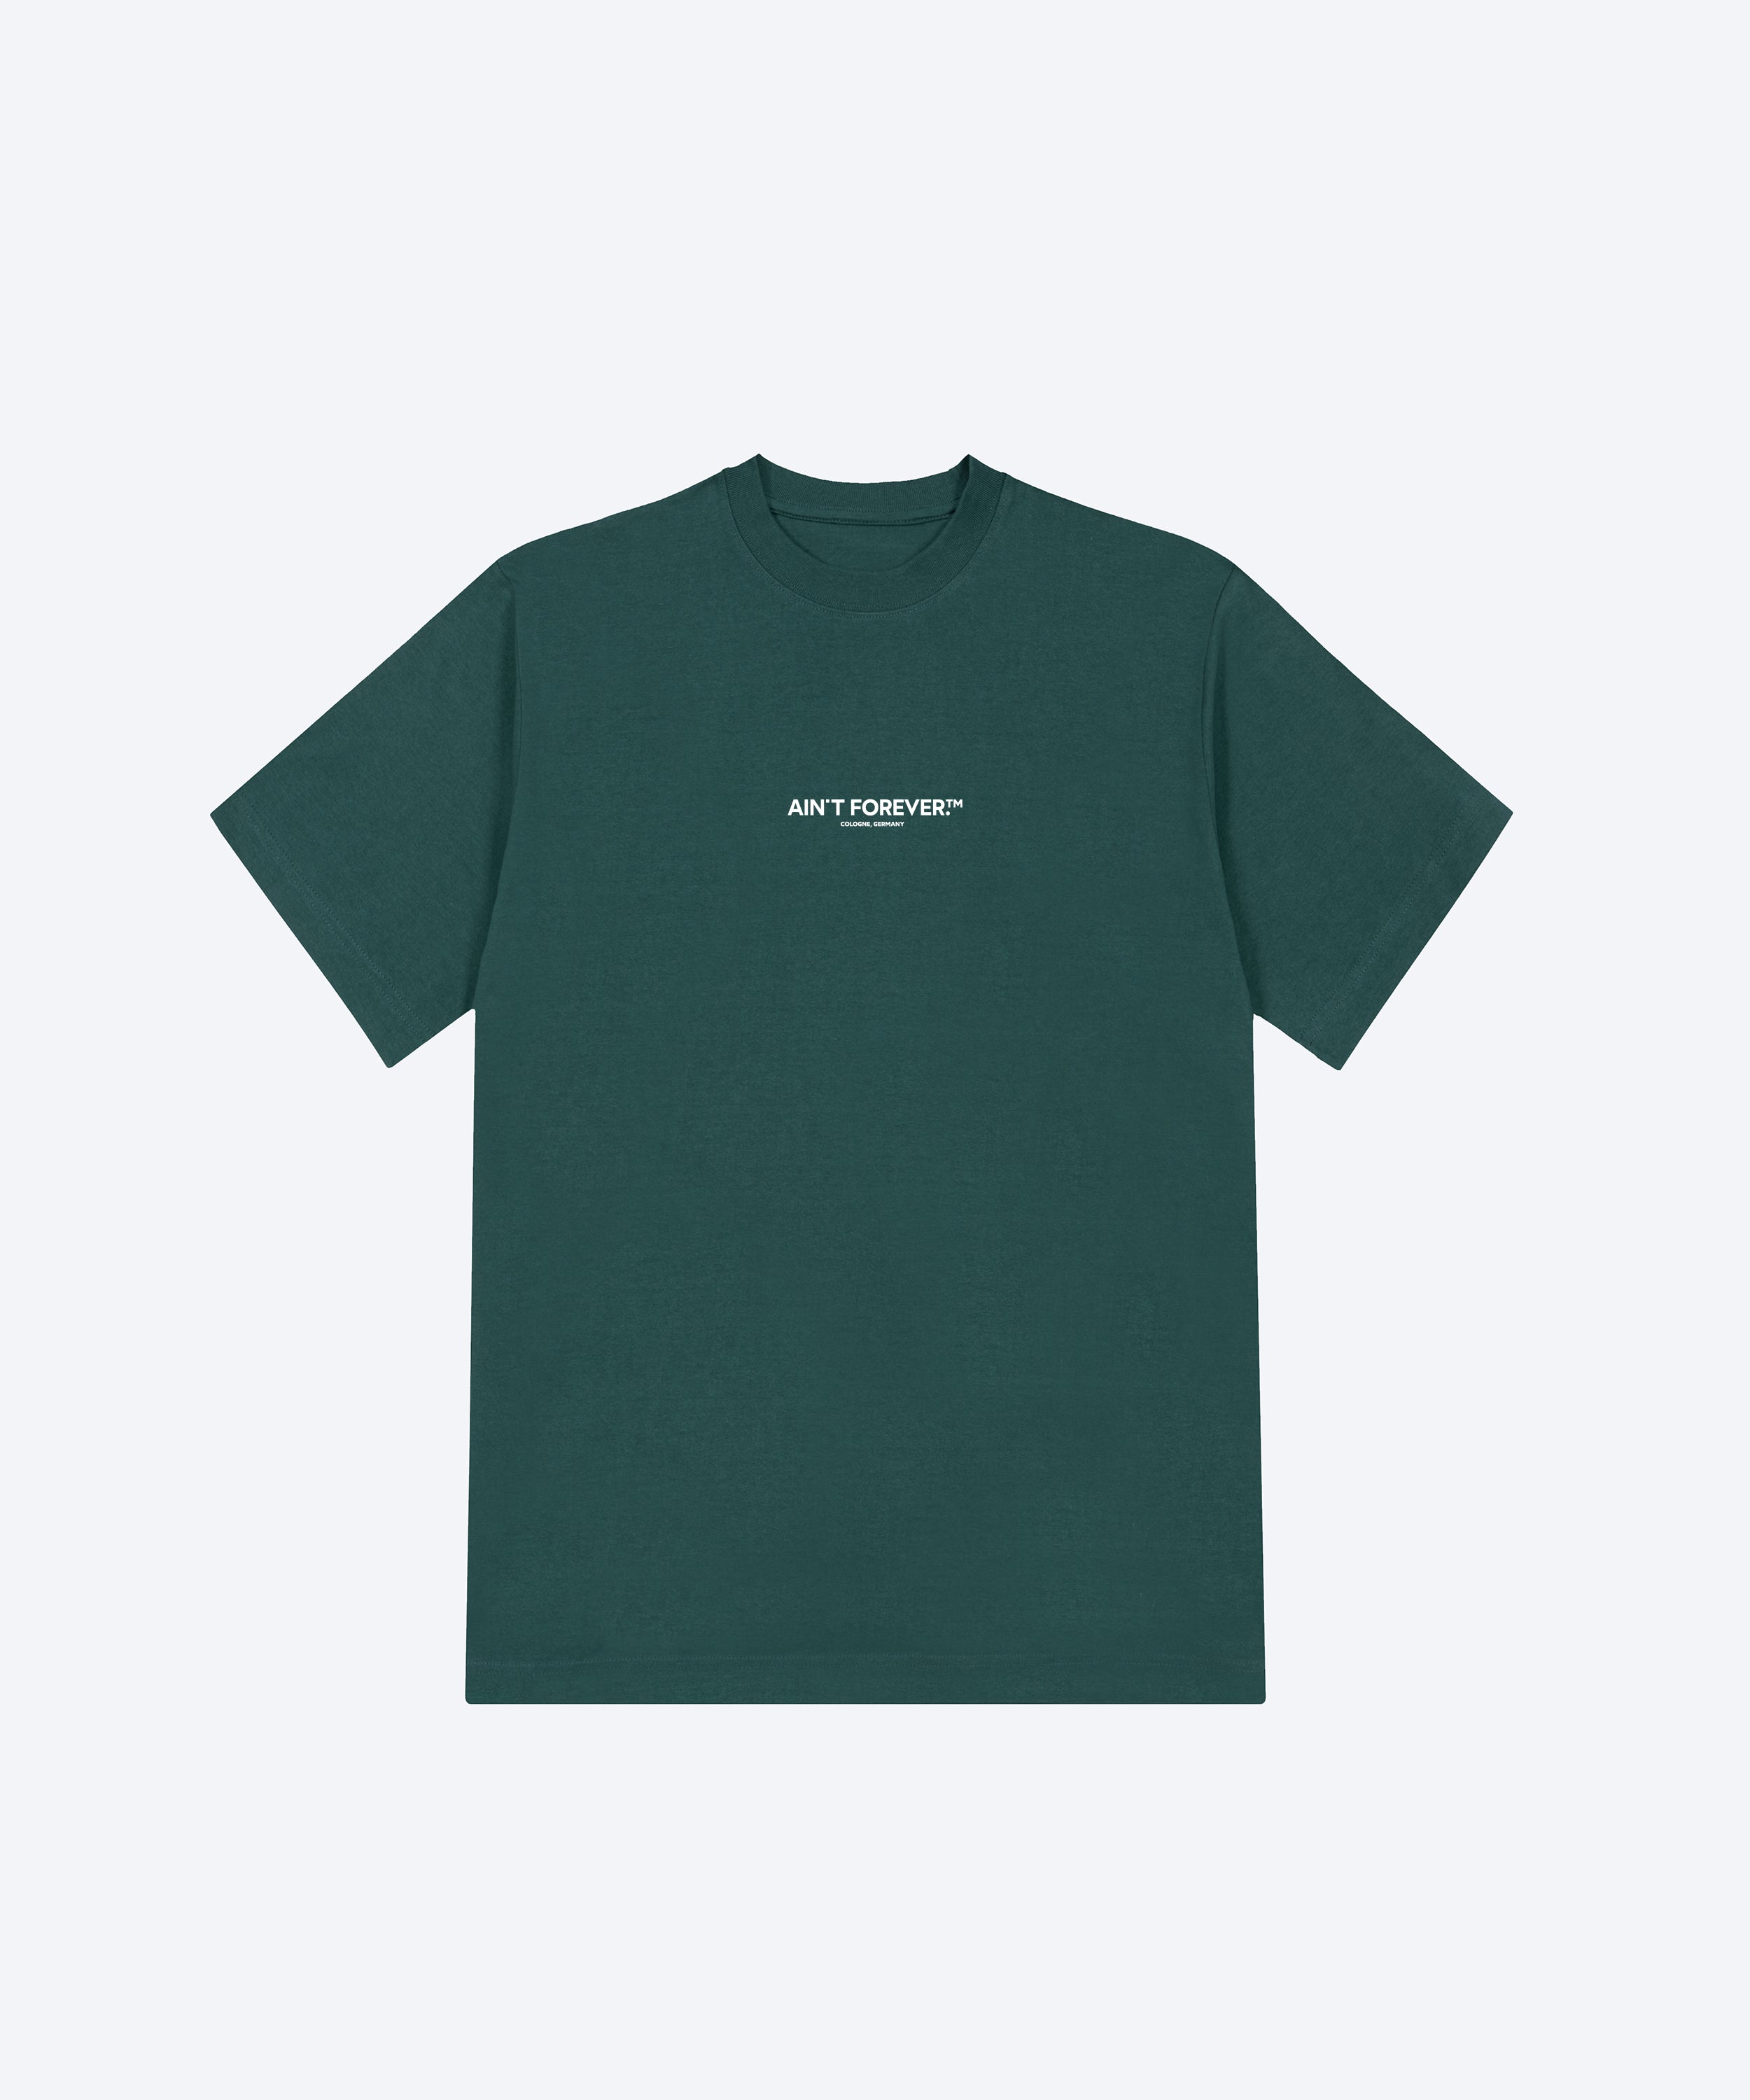 THE DEPARTURES T-SHIRT (GLAZED GREEN / WHITE)